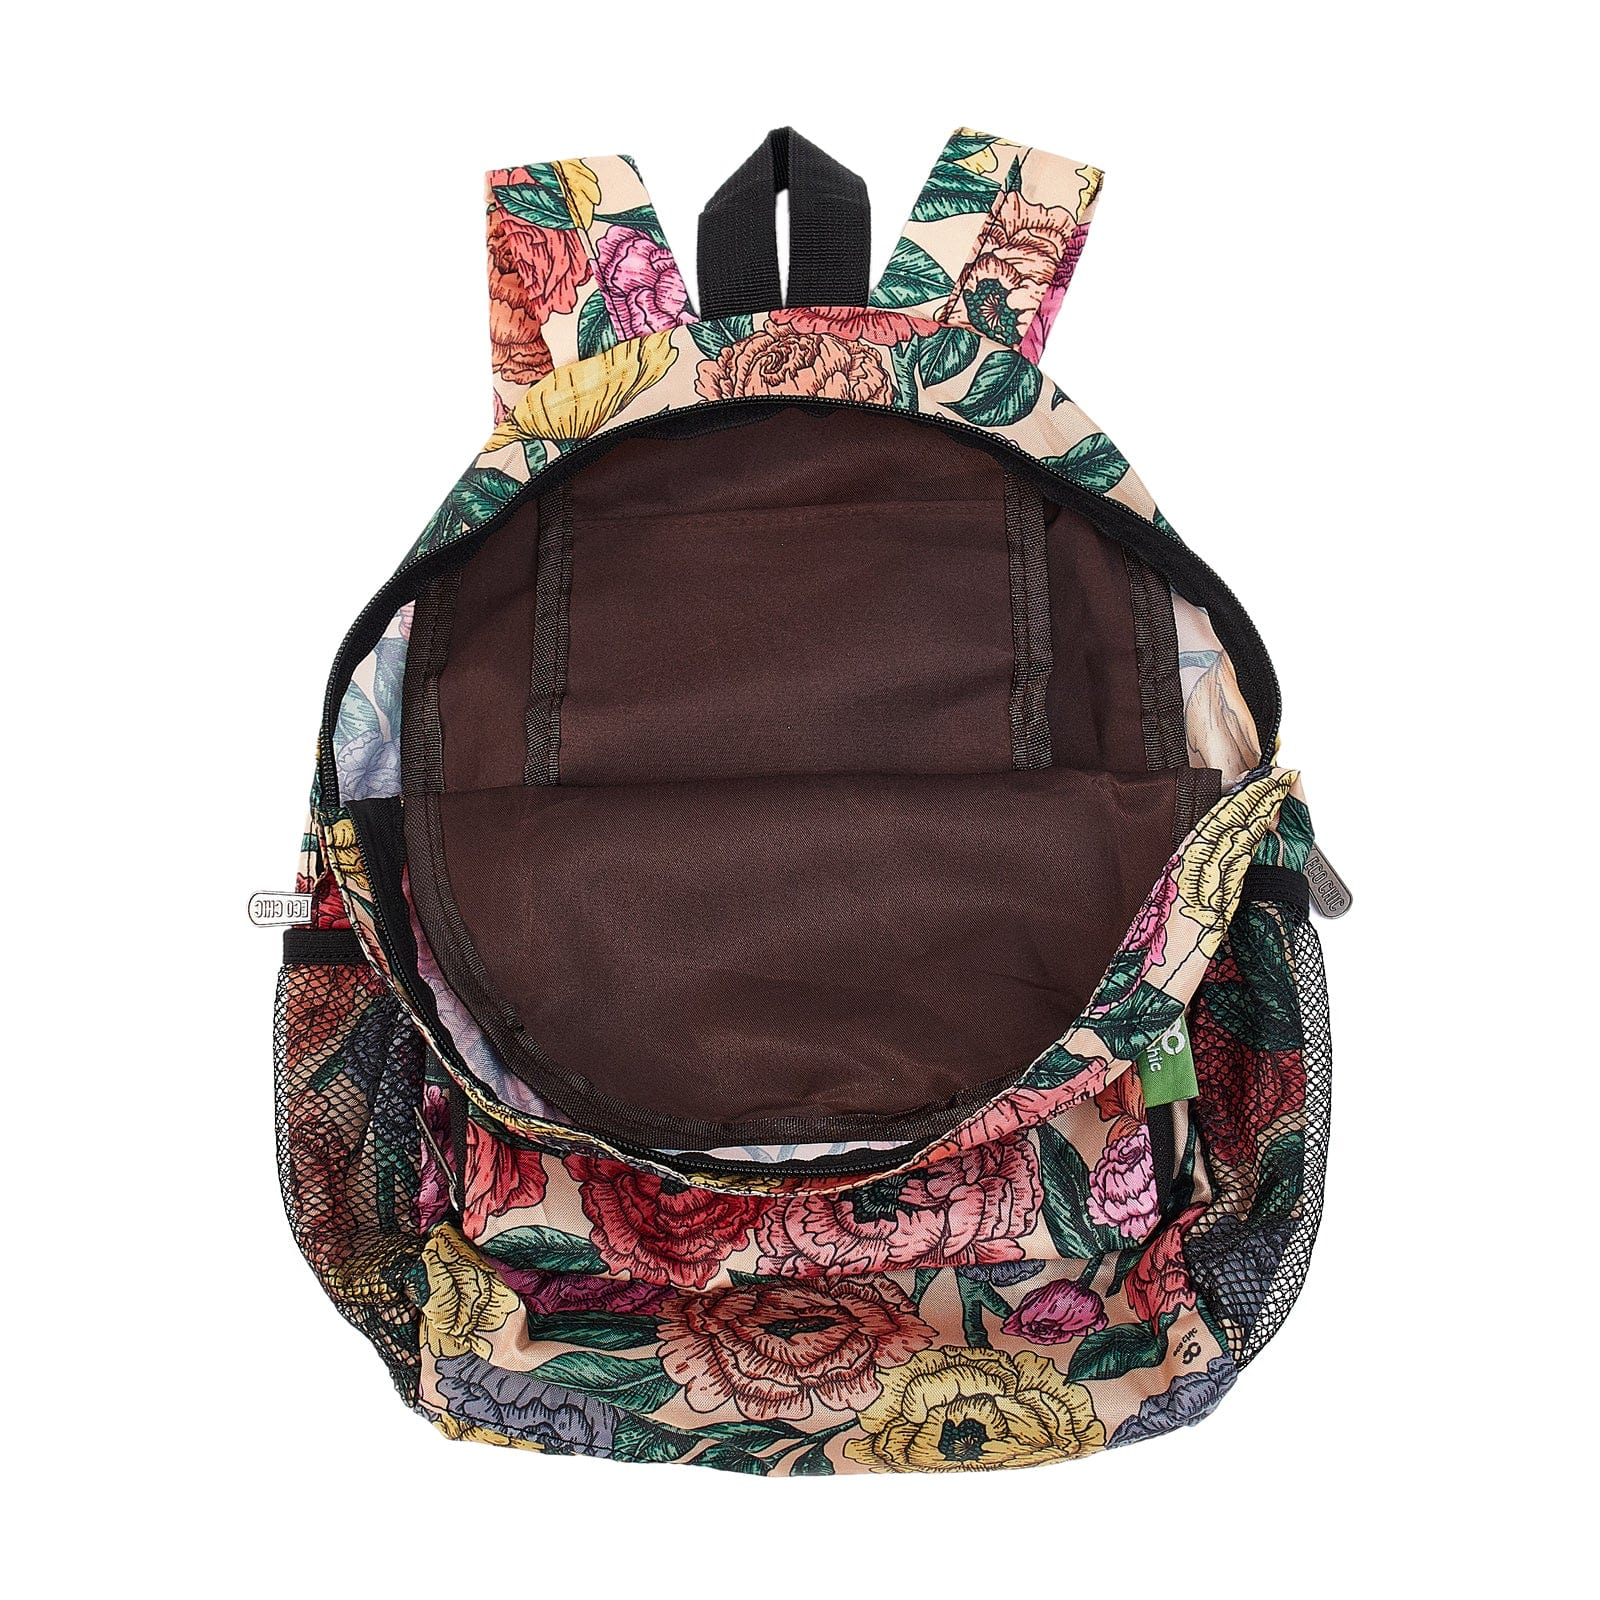 Eco Chic Beige Eco Chic Lightweight Foldable Mini Backpack Peonies